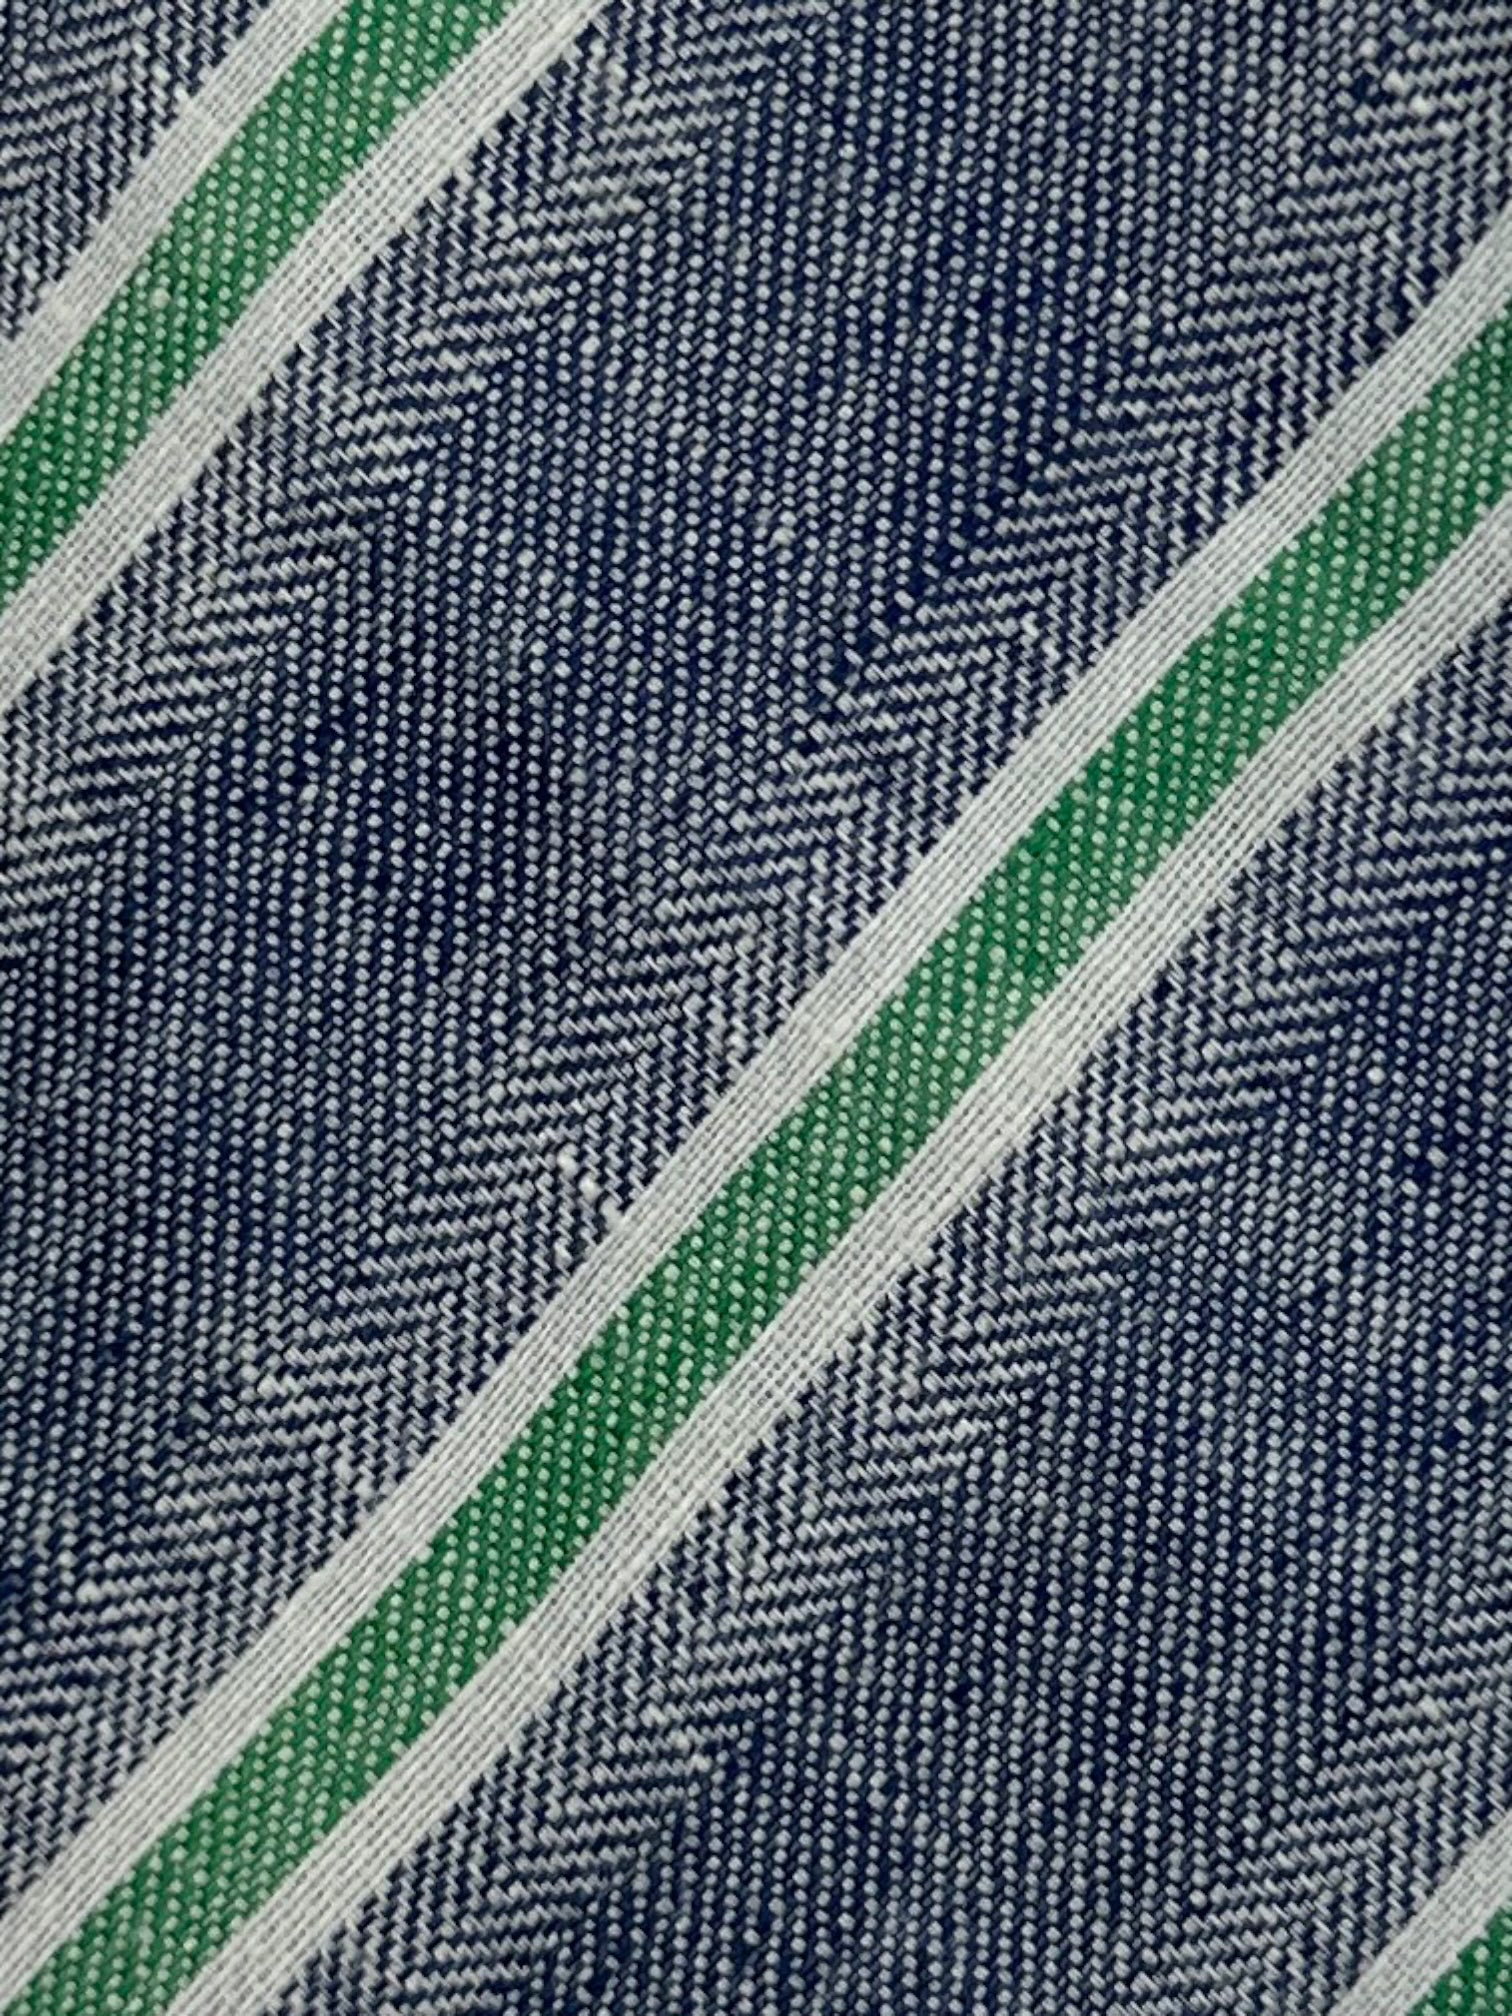 Kiton 7-Fold Denim Blue and Green Stiped, Untipped Linen Tie